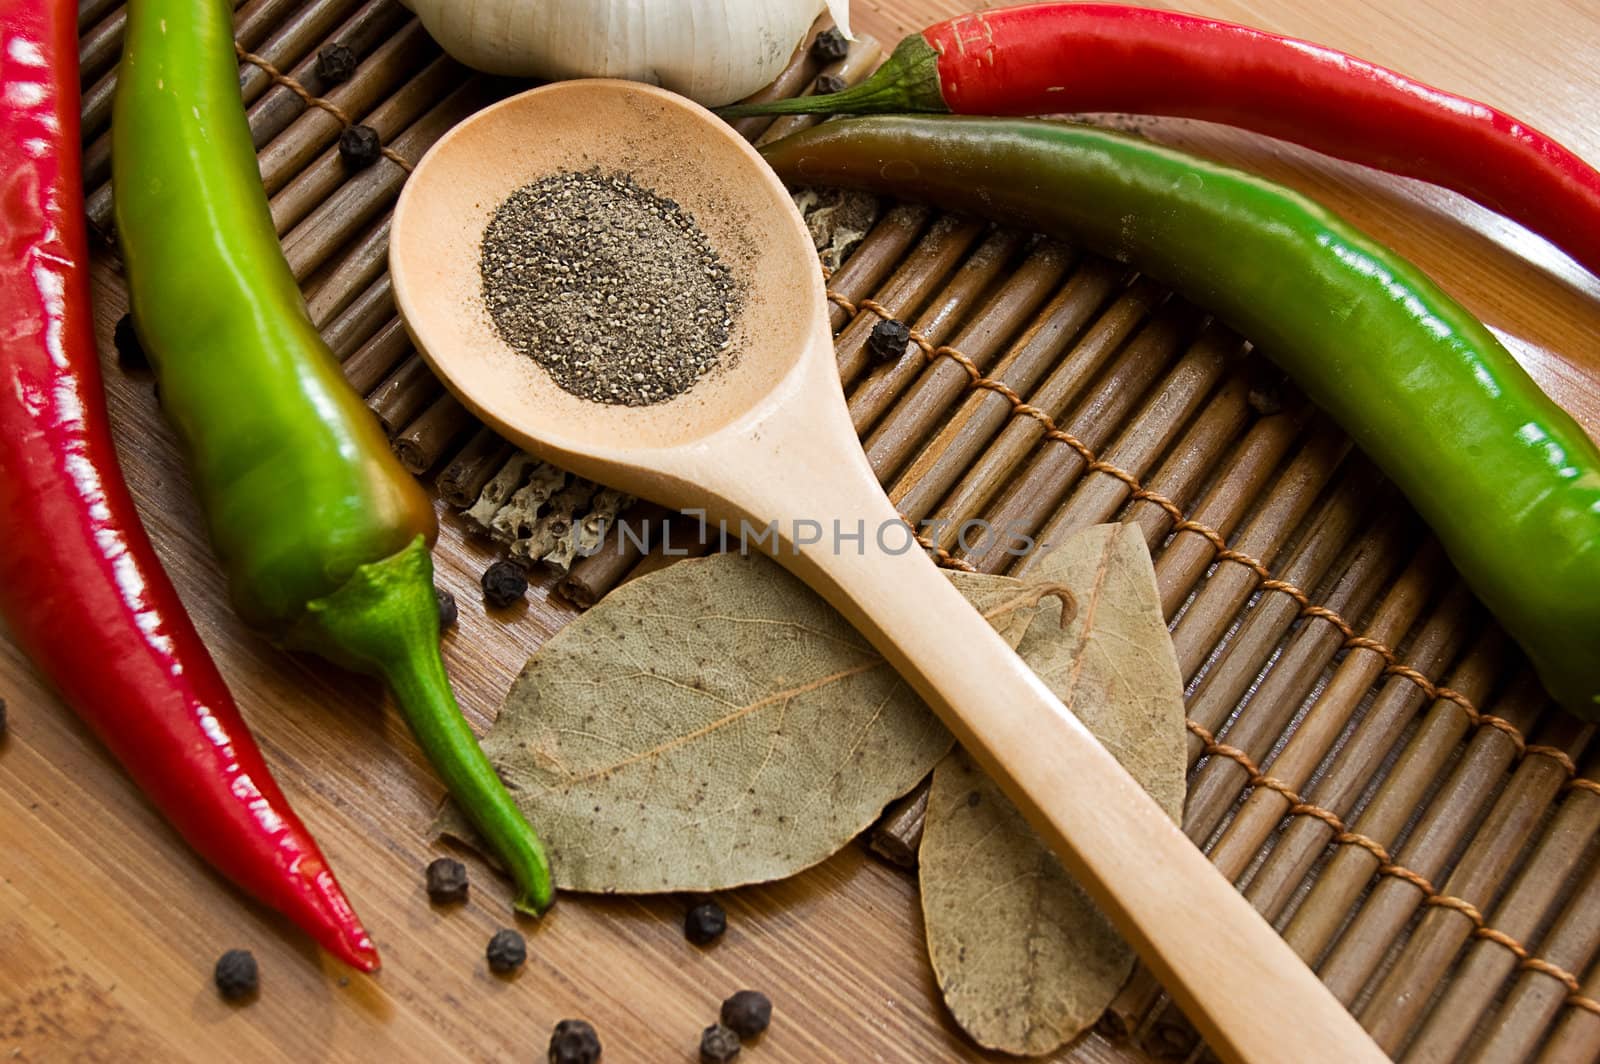 Some kinds of pepper and bay leaf on wooden plate